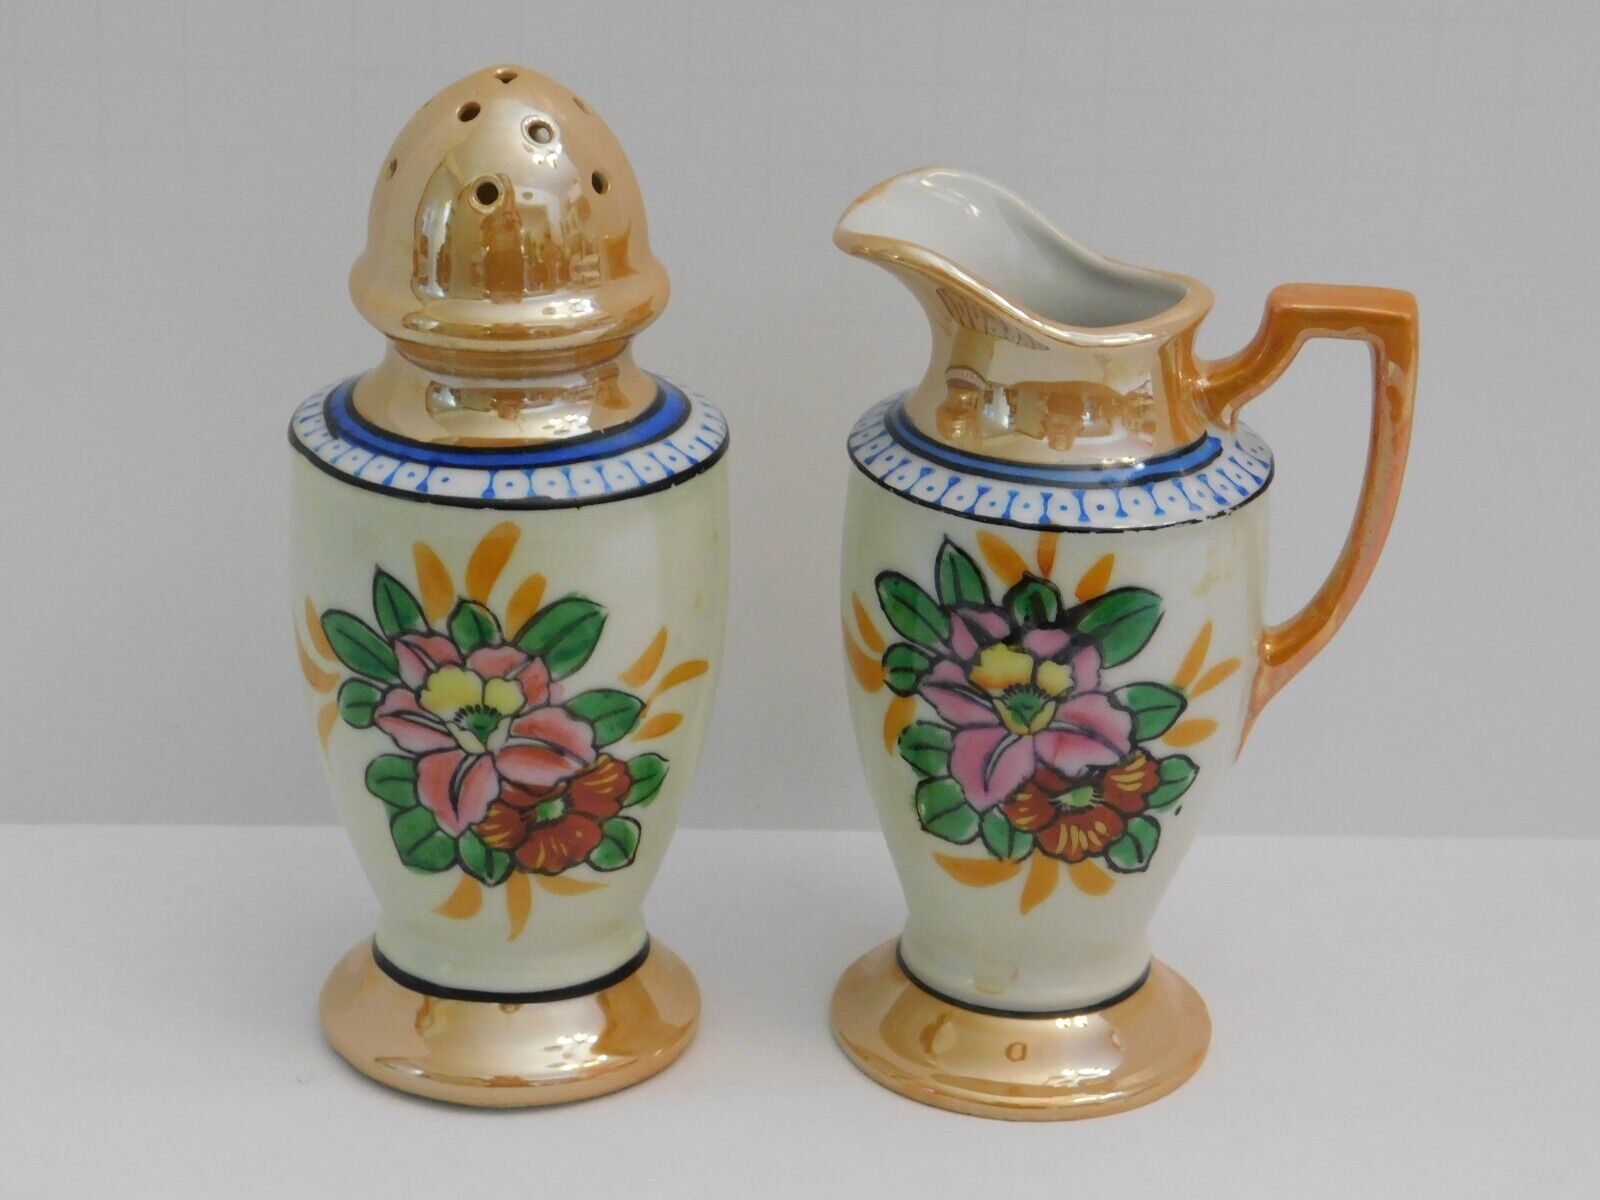 Vintage Muffineer Sugar Shaker & Syrup Pitcher Creamer Hand Painted Japan